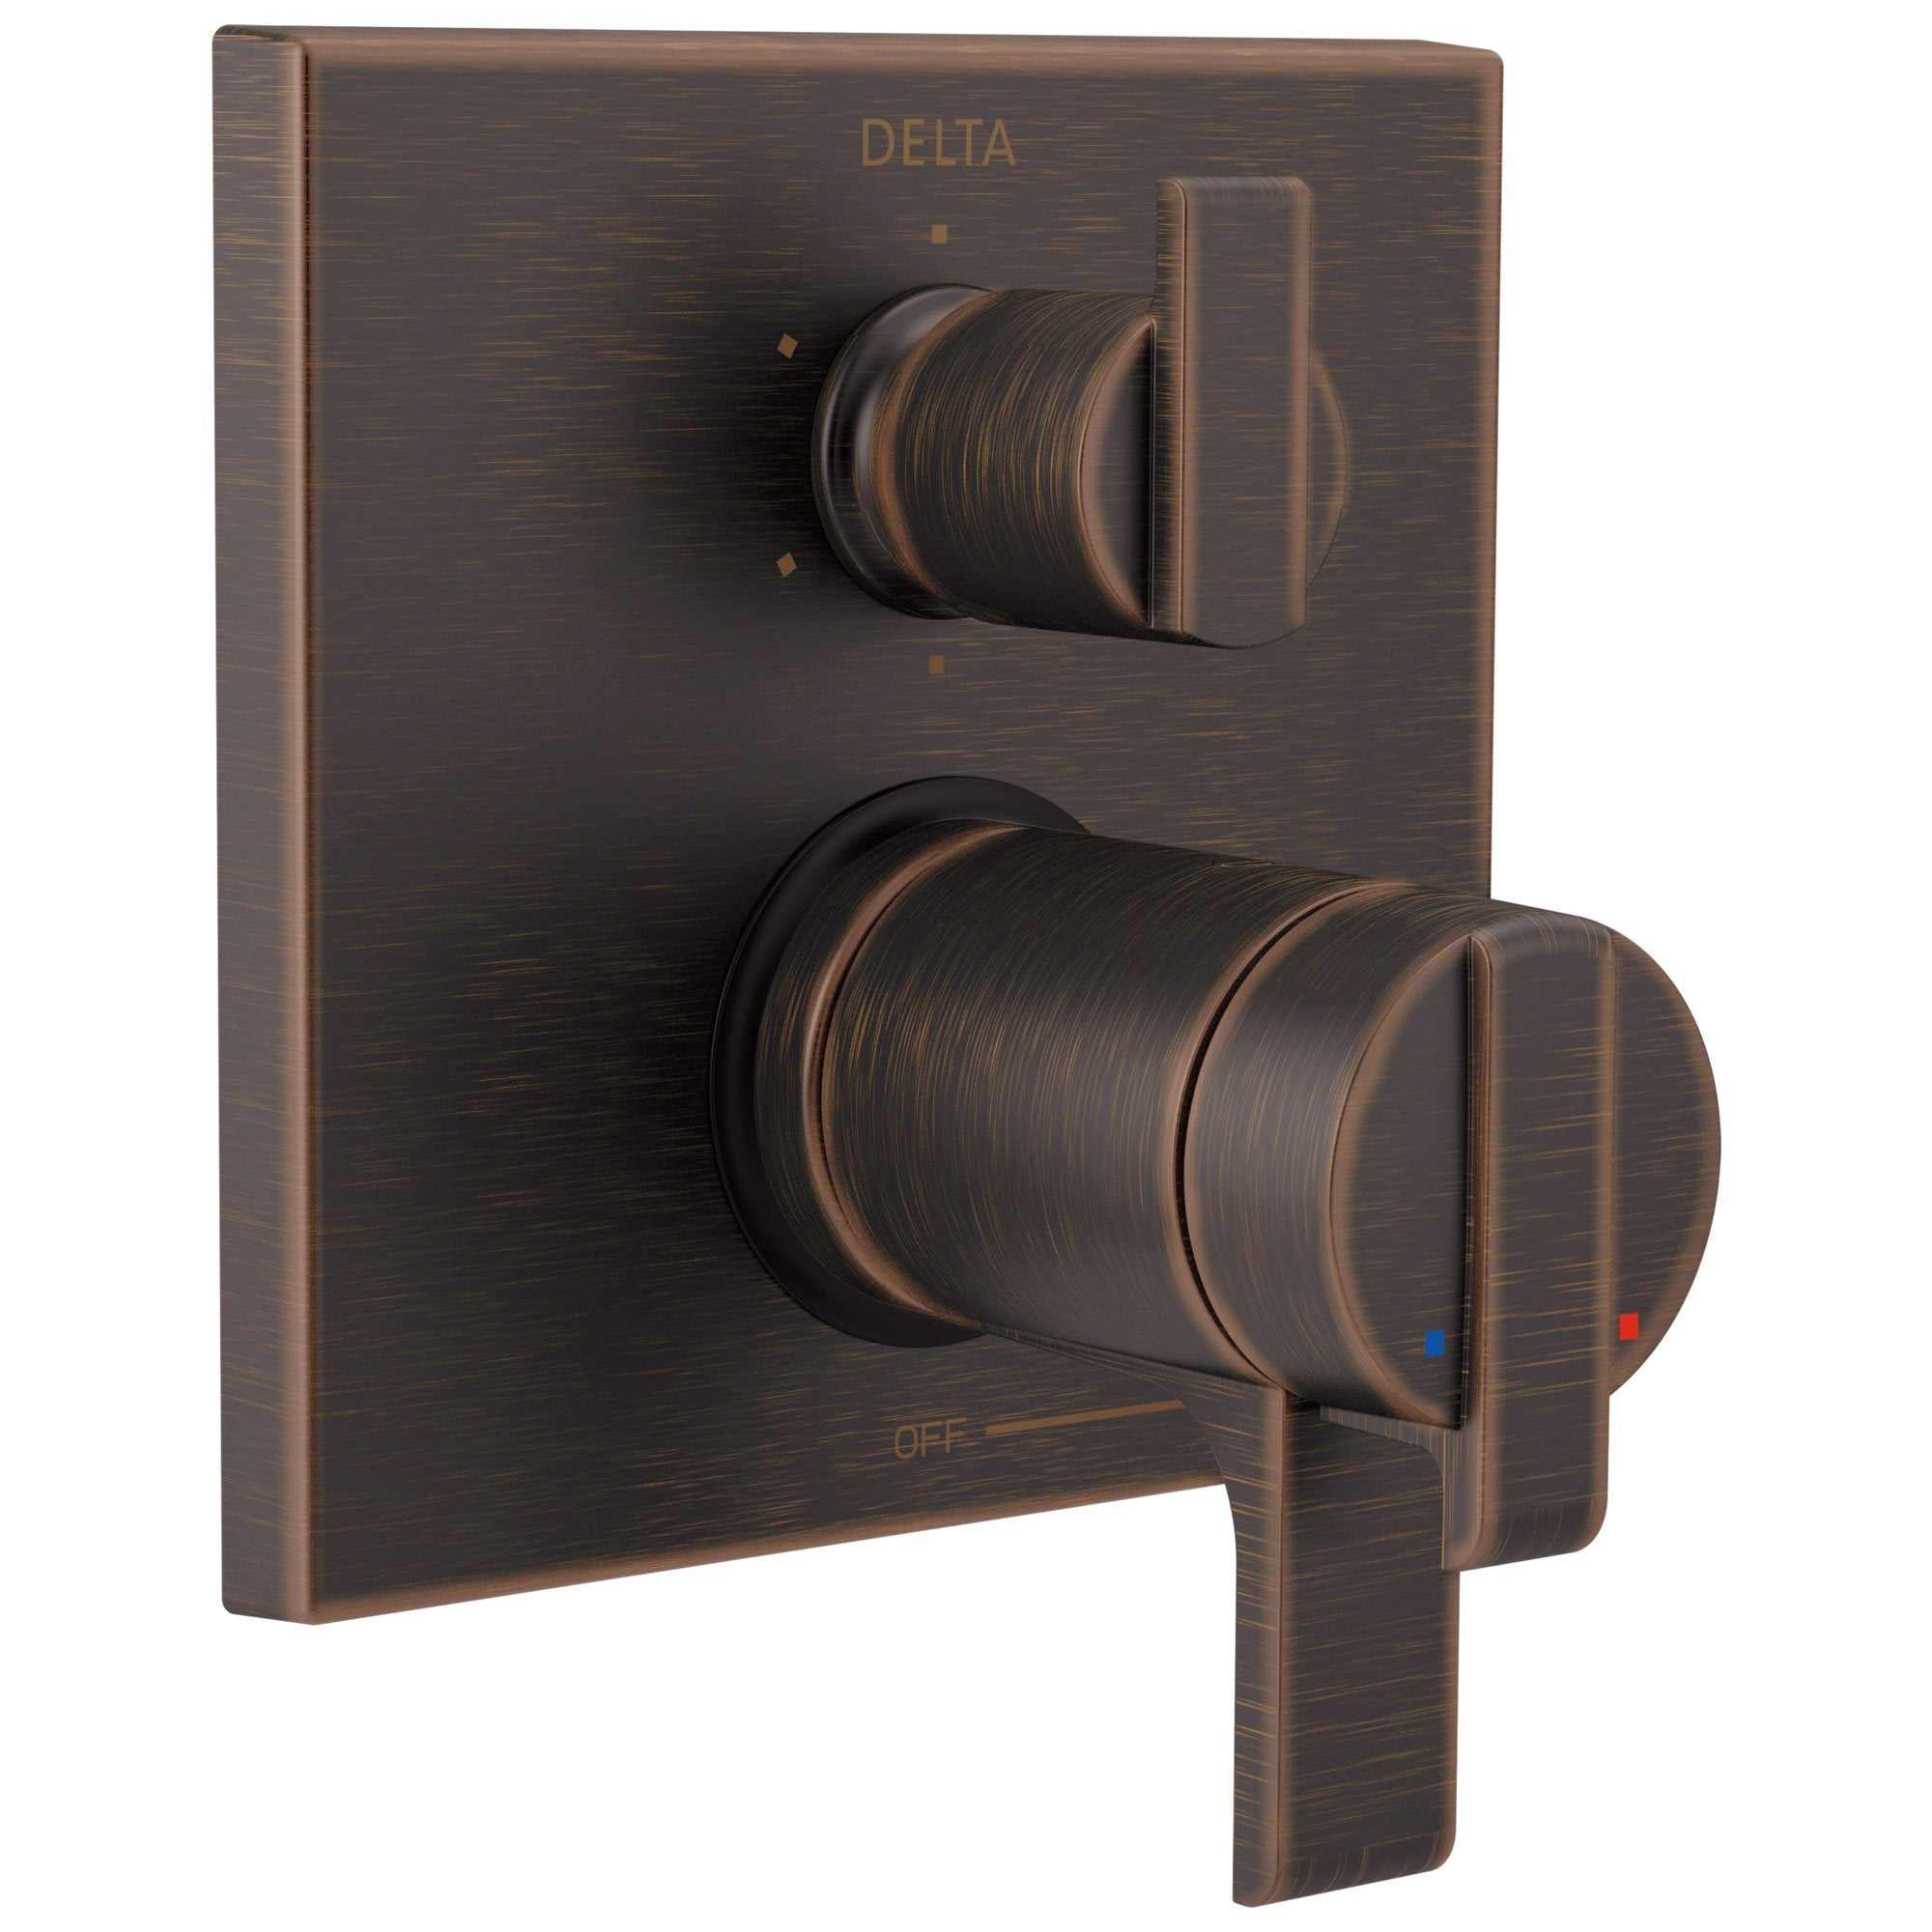 Delta Ara Collection Venetian Bronze Modern Thermostatic Shower Faucet Control with 6-Setting Integrated Diverter Includes Trim Kit and Valve without Stops D2114V